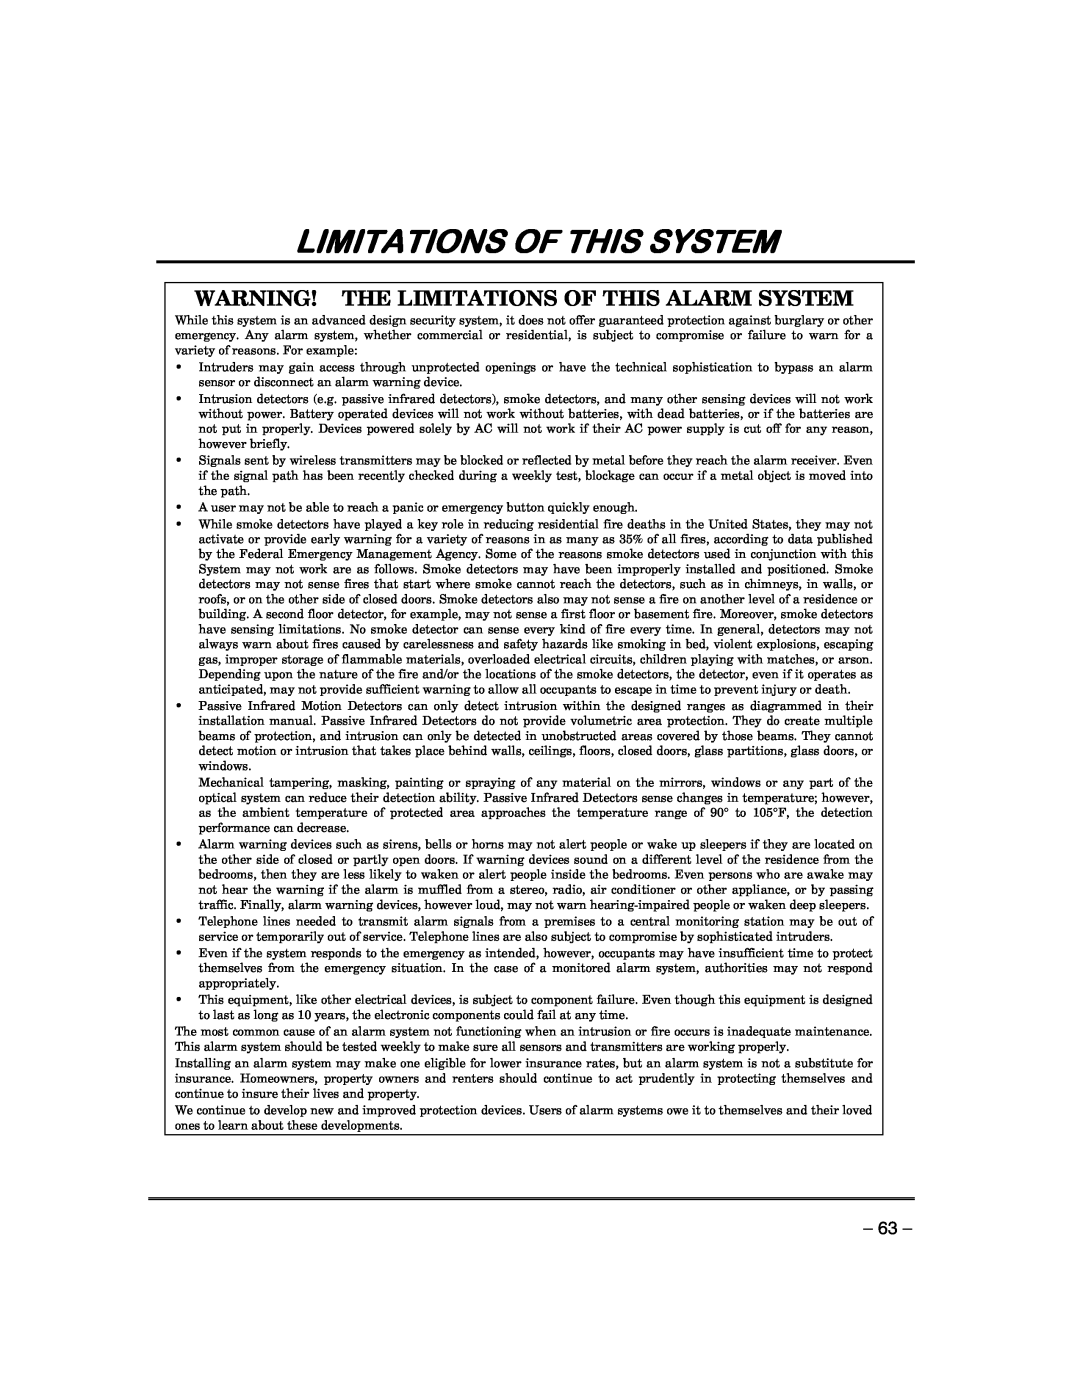 First Alert FA168CPSSIA, FA148CPSIA manual Limitations Of This System, Warning! The Limitations Of This Alarm System 